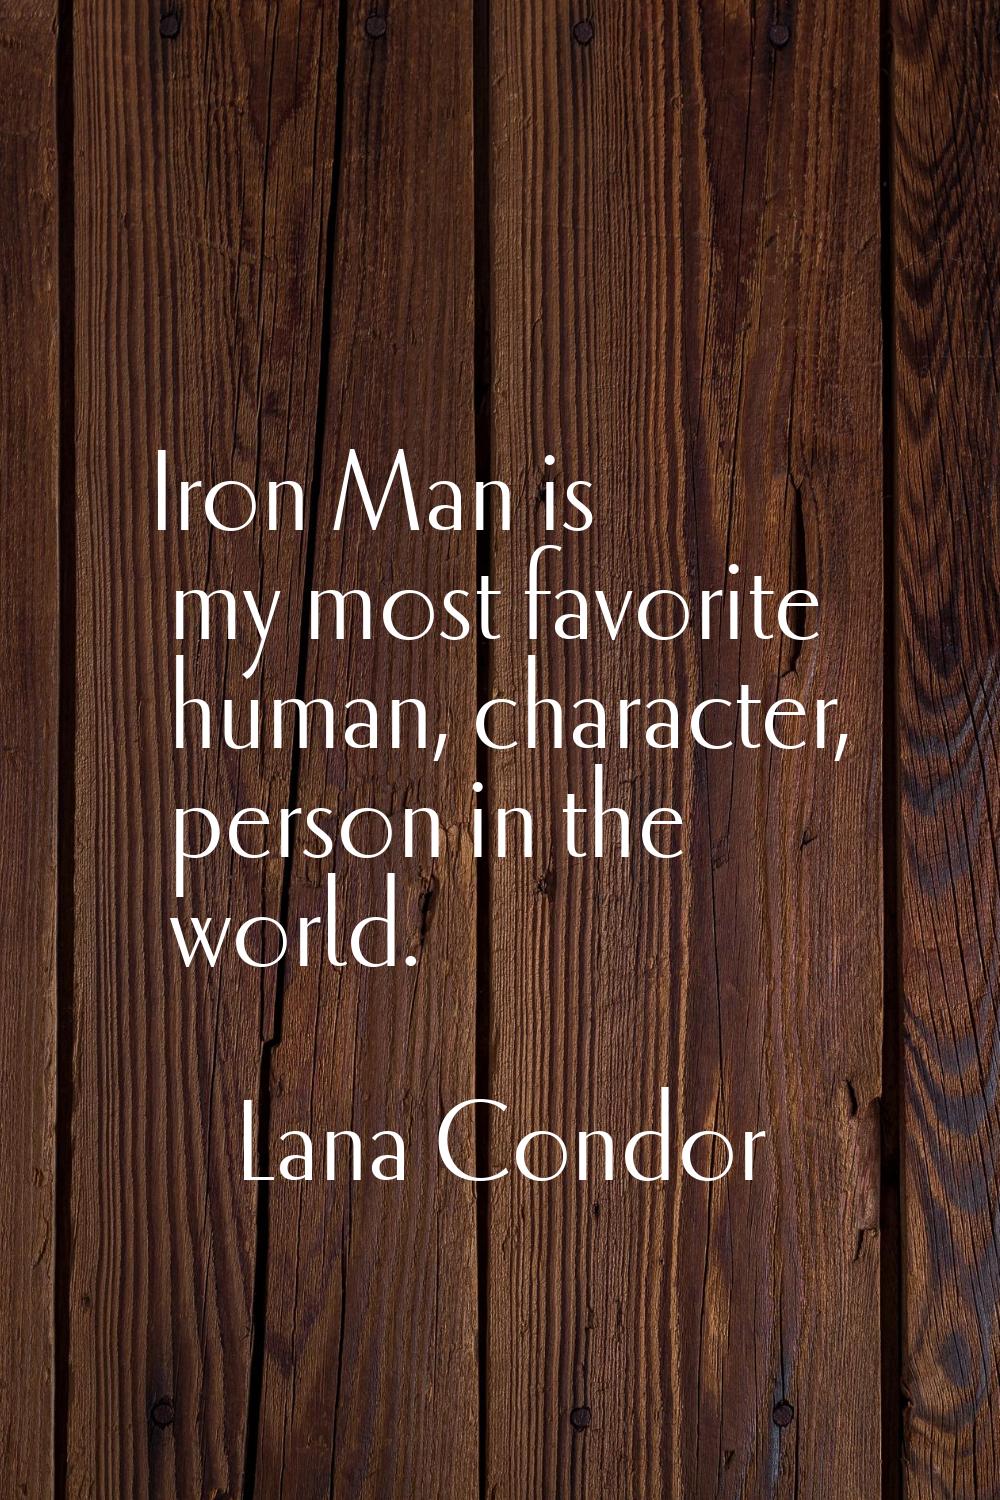 Iron Man is my most favorite human, character, person in the world.